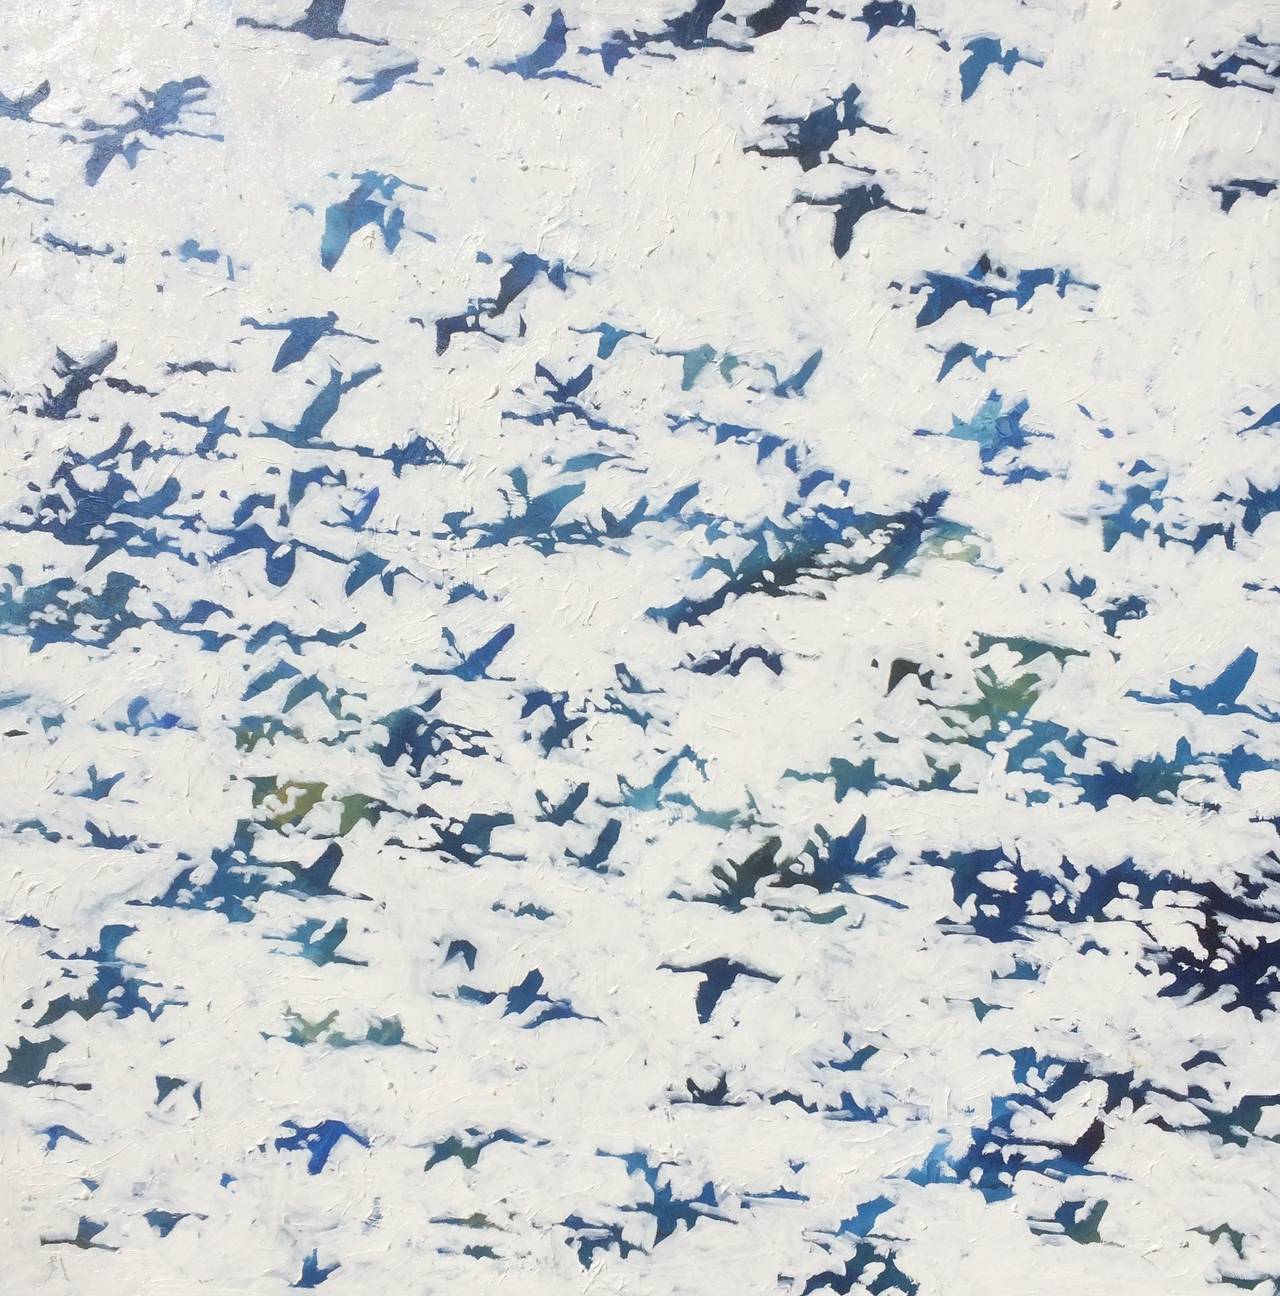 Jeremy Houghton - Come Fly With Me at 1stdibs